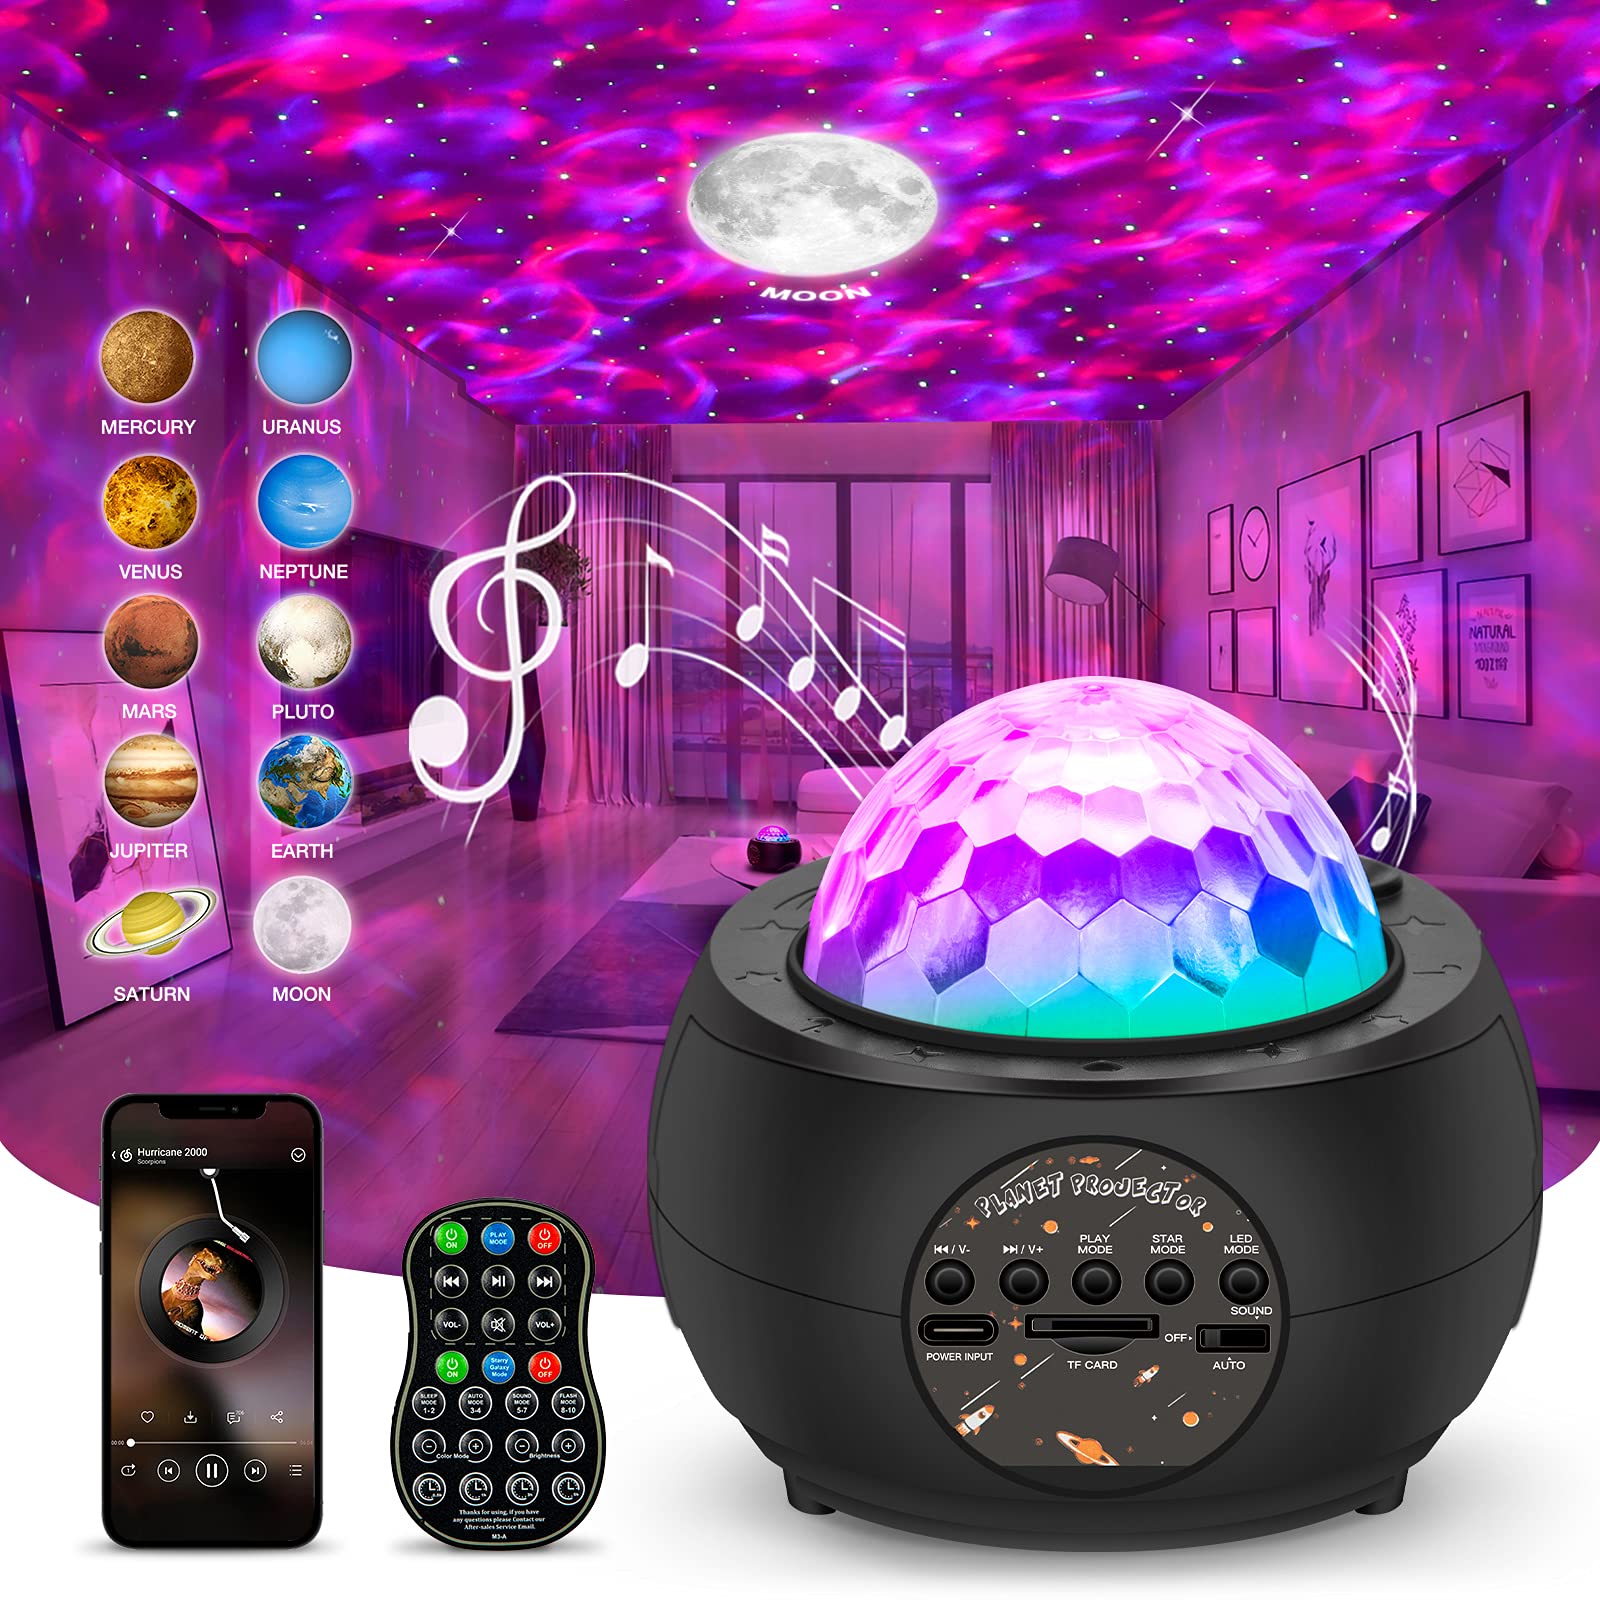 IBELL Night Light Star Projector, Galaxy Planets Projector Light 15 Colors Nebula Cloud Starlight Projector Starry Night Lamp with Bluetooth Speaker & Remote Control for Kids Adults Gifts Room Decor